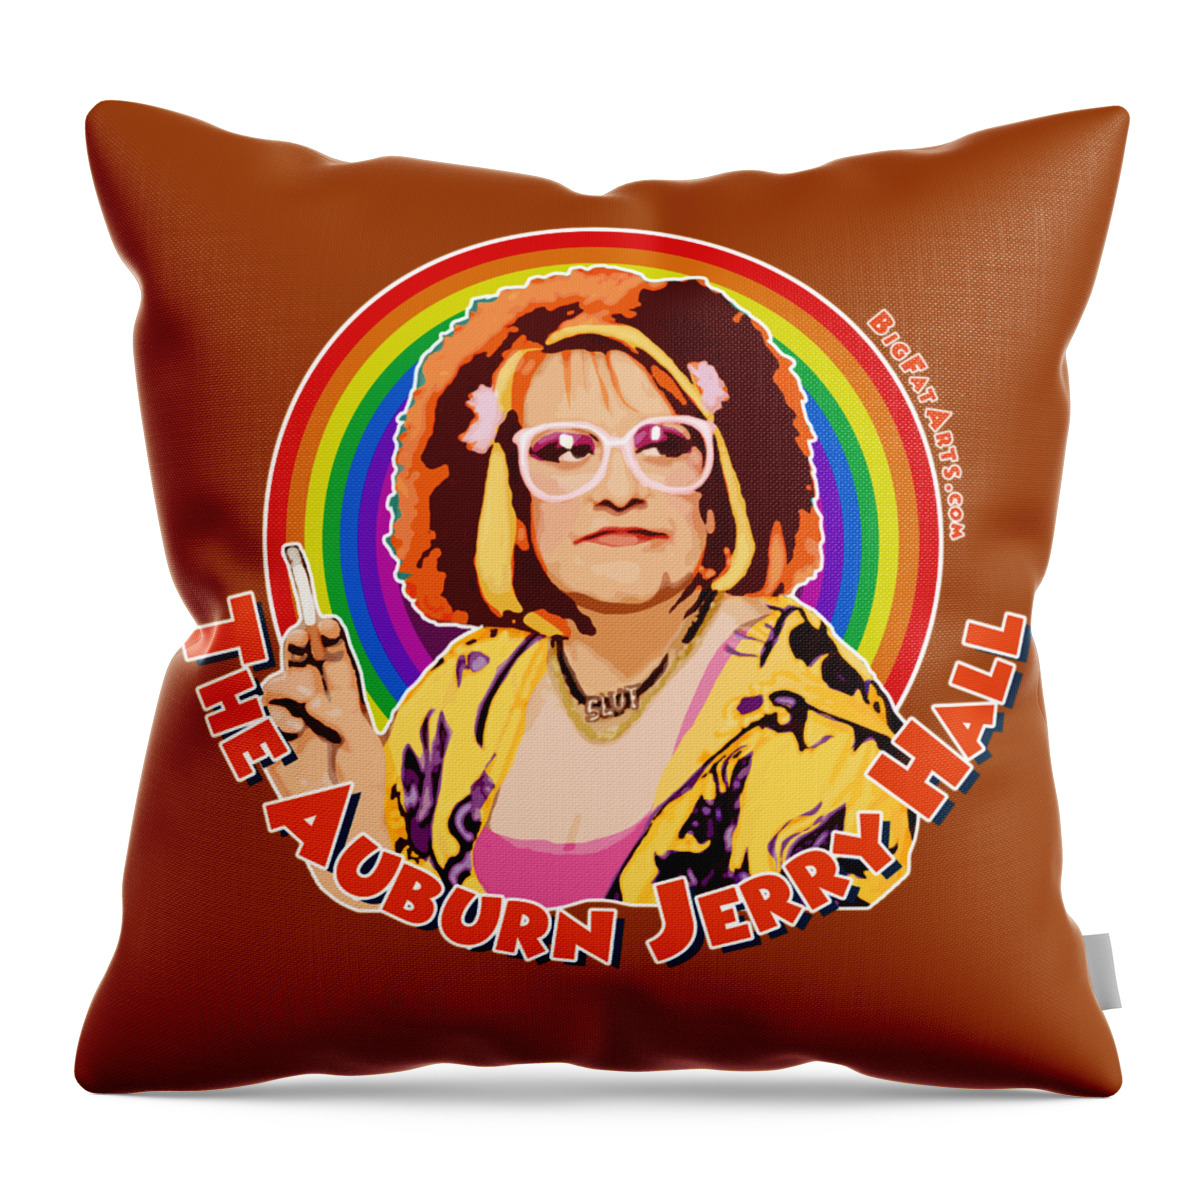 Auburn Jerry Hall Kathy Burke Gimme Gimme Gimme Vile Pussy Person Gay Laziness Throw Pillow featuring the digital art The Auburn Jerry Hall by Big Fat Arts